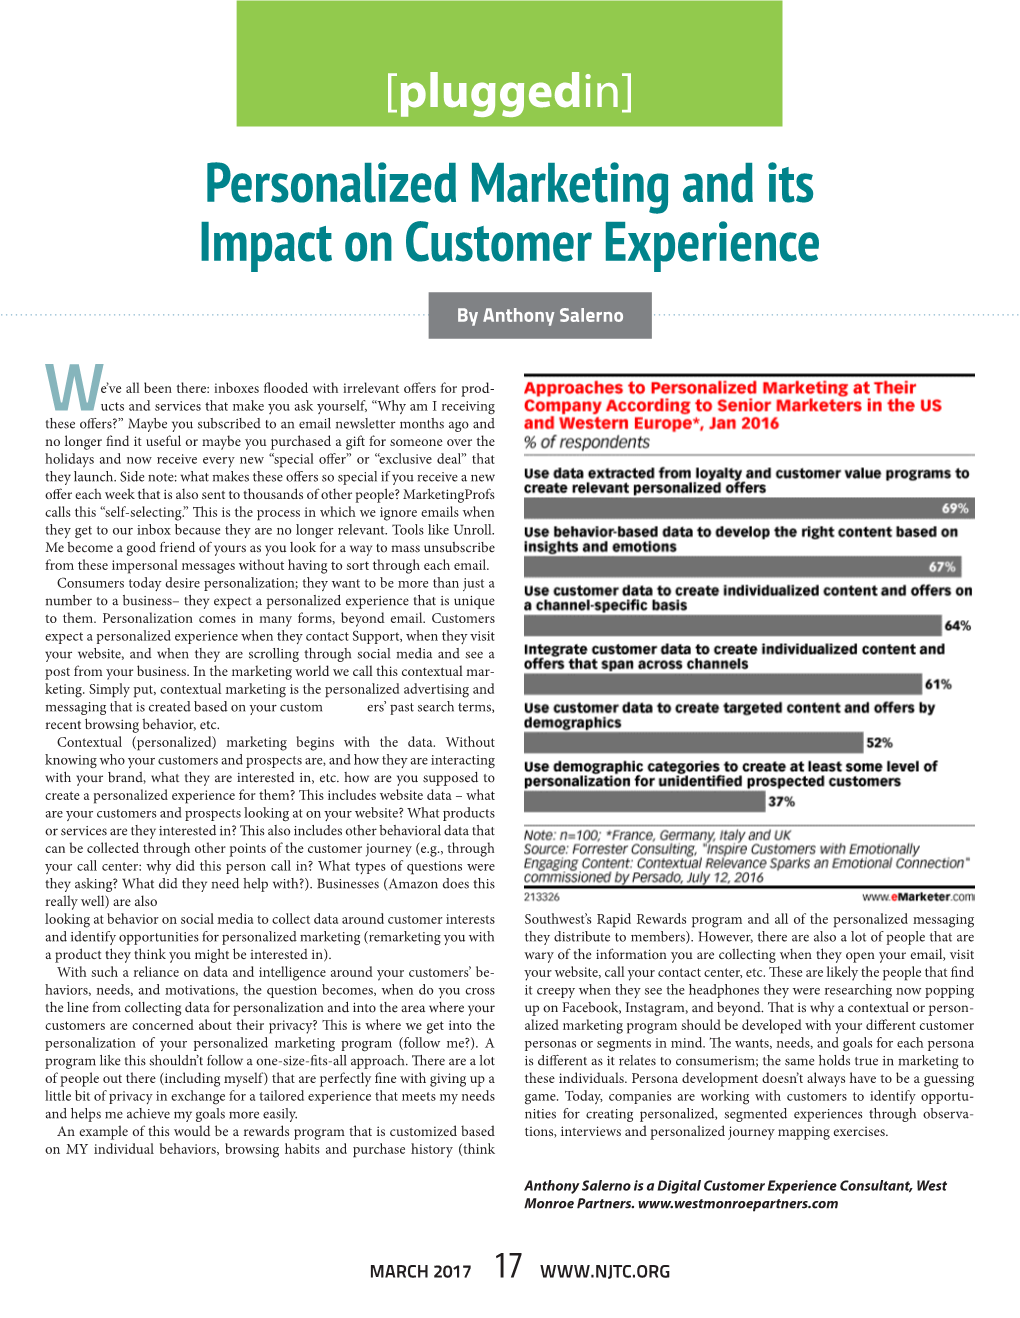 Personalized Marketing and Its Impact on Customer Experience